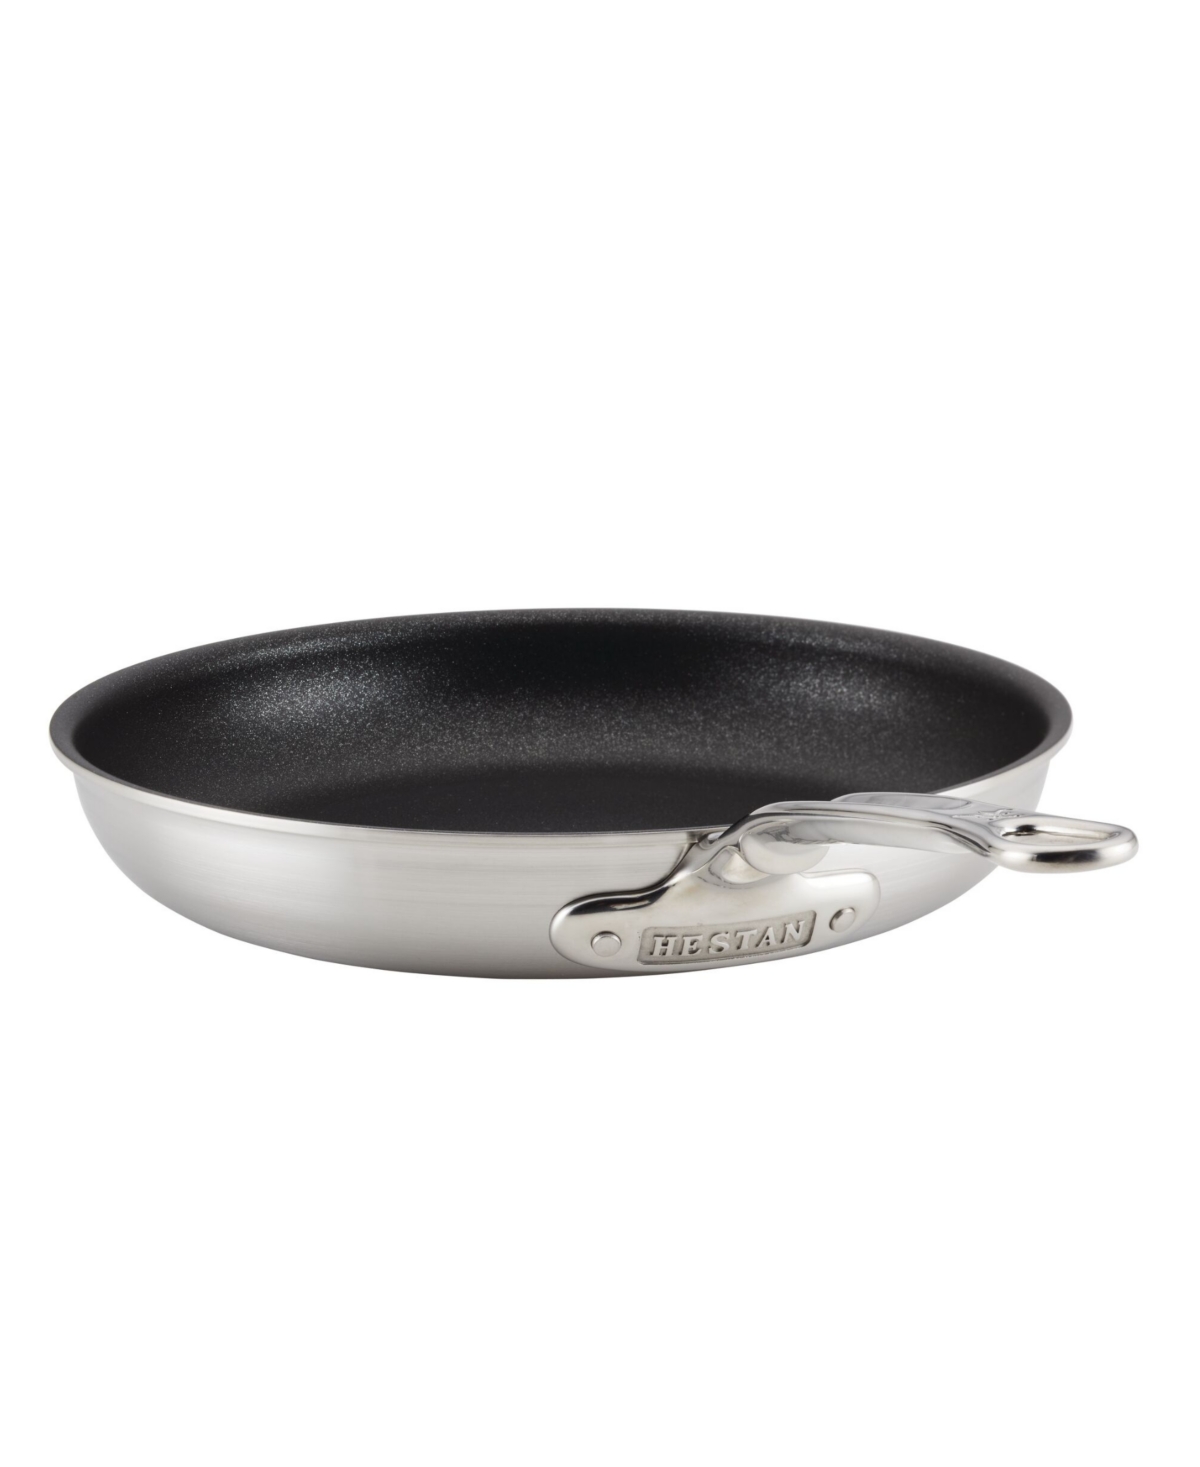 Shop Hestan Thomas Keller Insignia Commercial Clad Stainless Steel With Titum Nonstick 11" Open Saute Pan In No Color